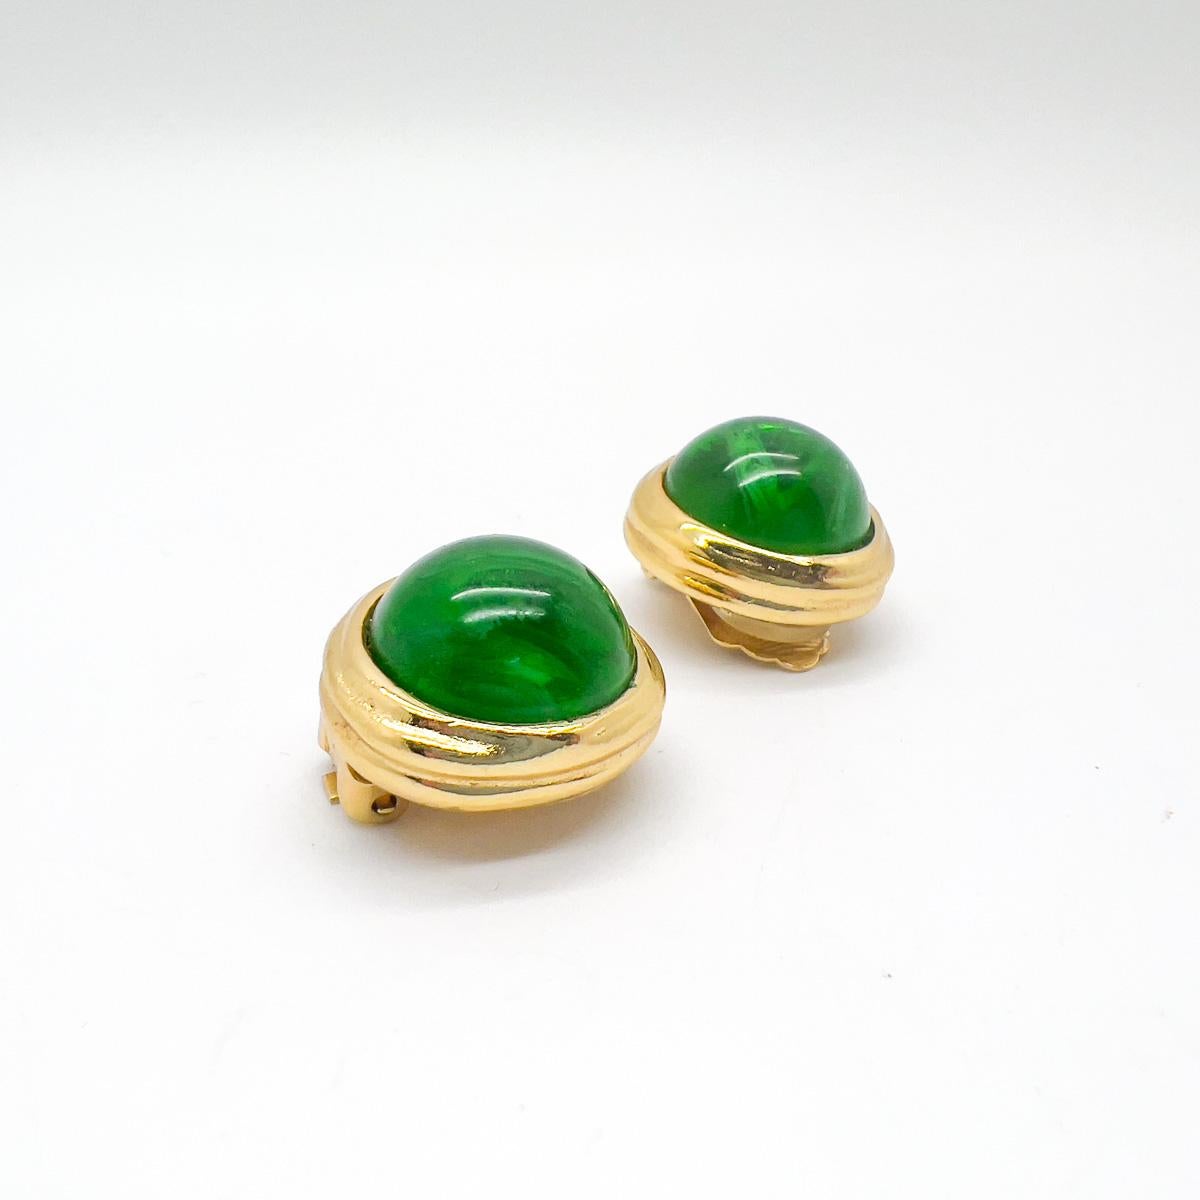 A pair of Vintage Dior Emerald Cabochon Earrings. Sublime, juicy and rich flawed emerald cabochon stones set in a simple gallery setting of lustrous gold. The perfect pair of couture clips.
With archive pieces from her own Dior collection displayed